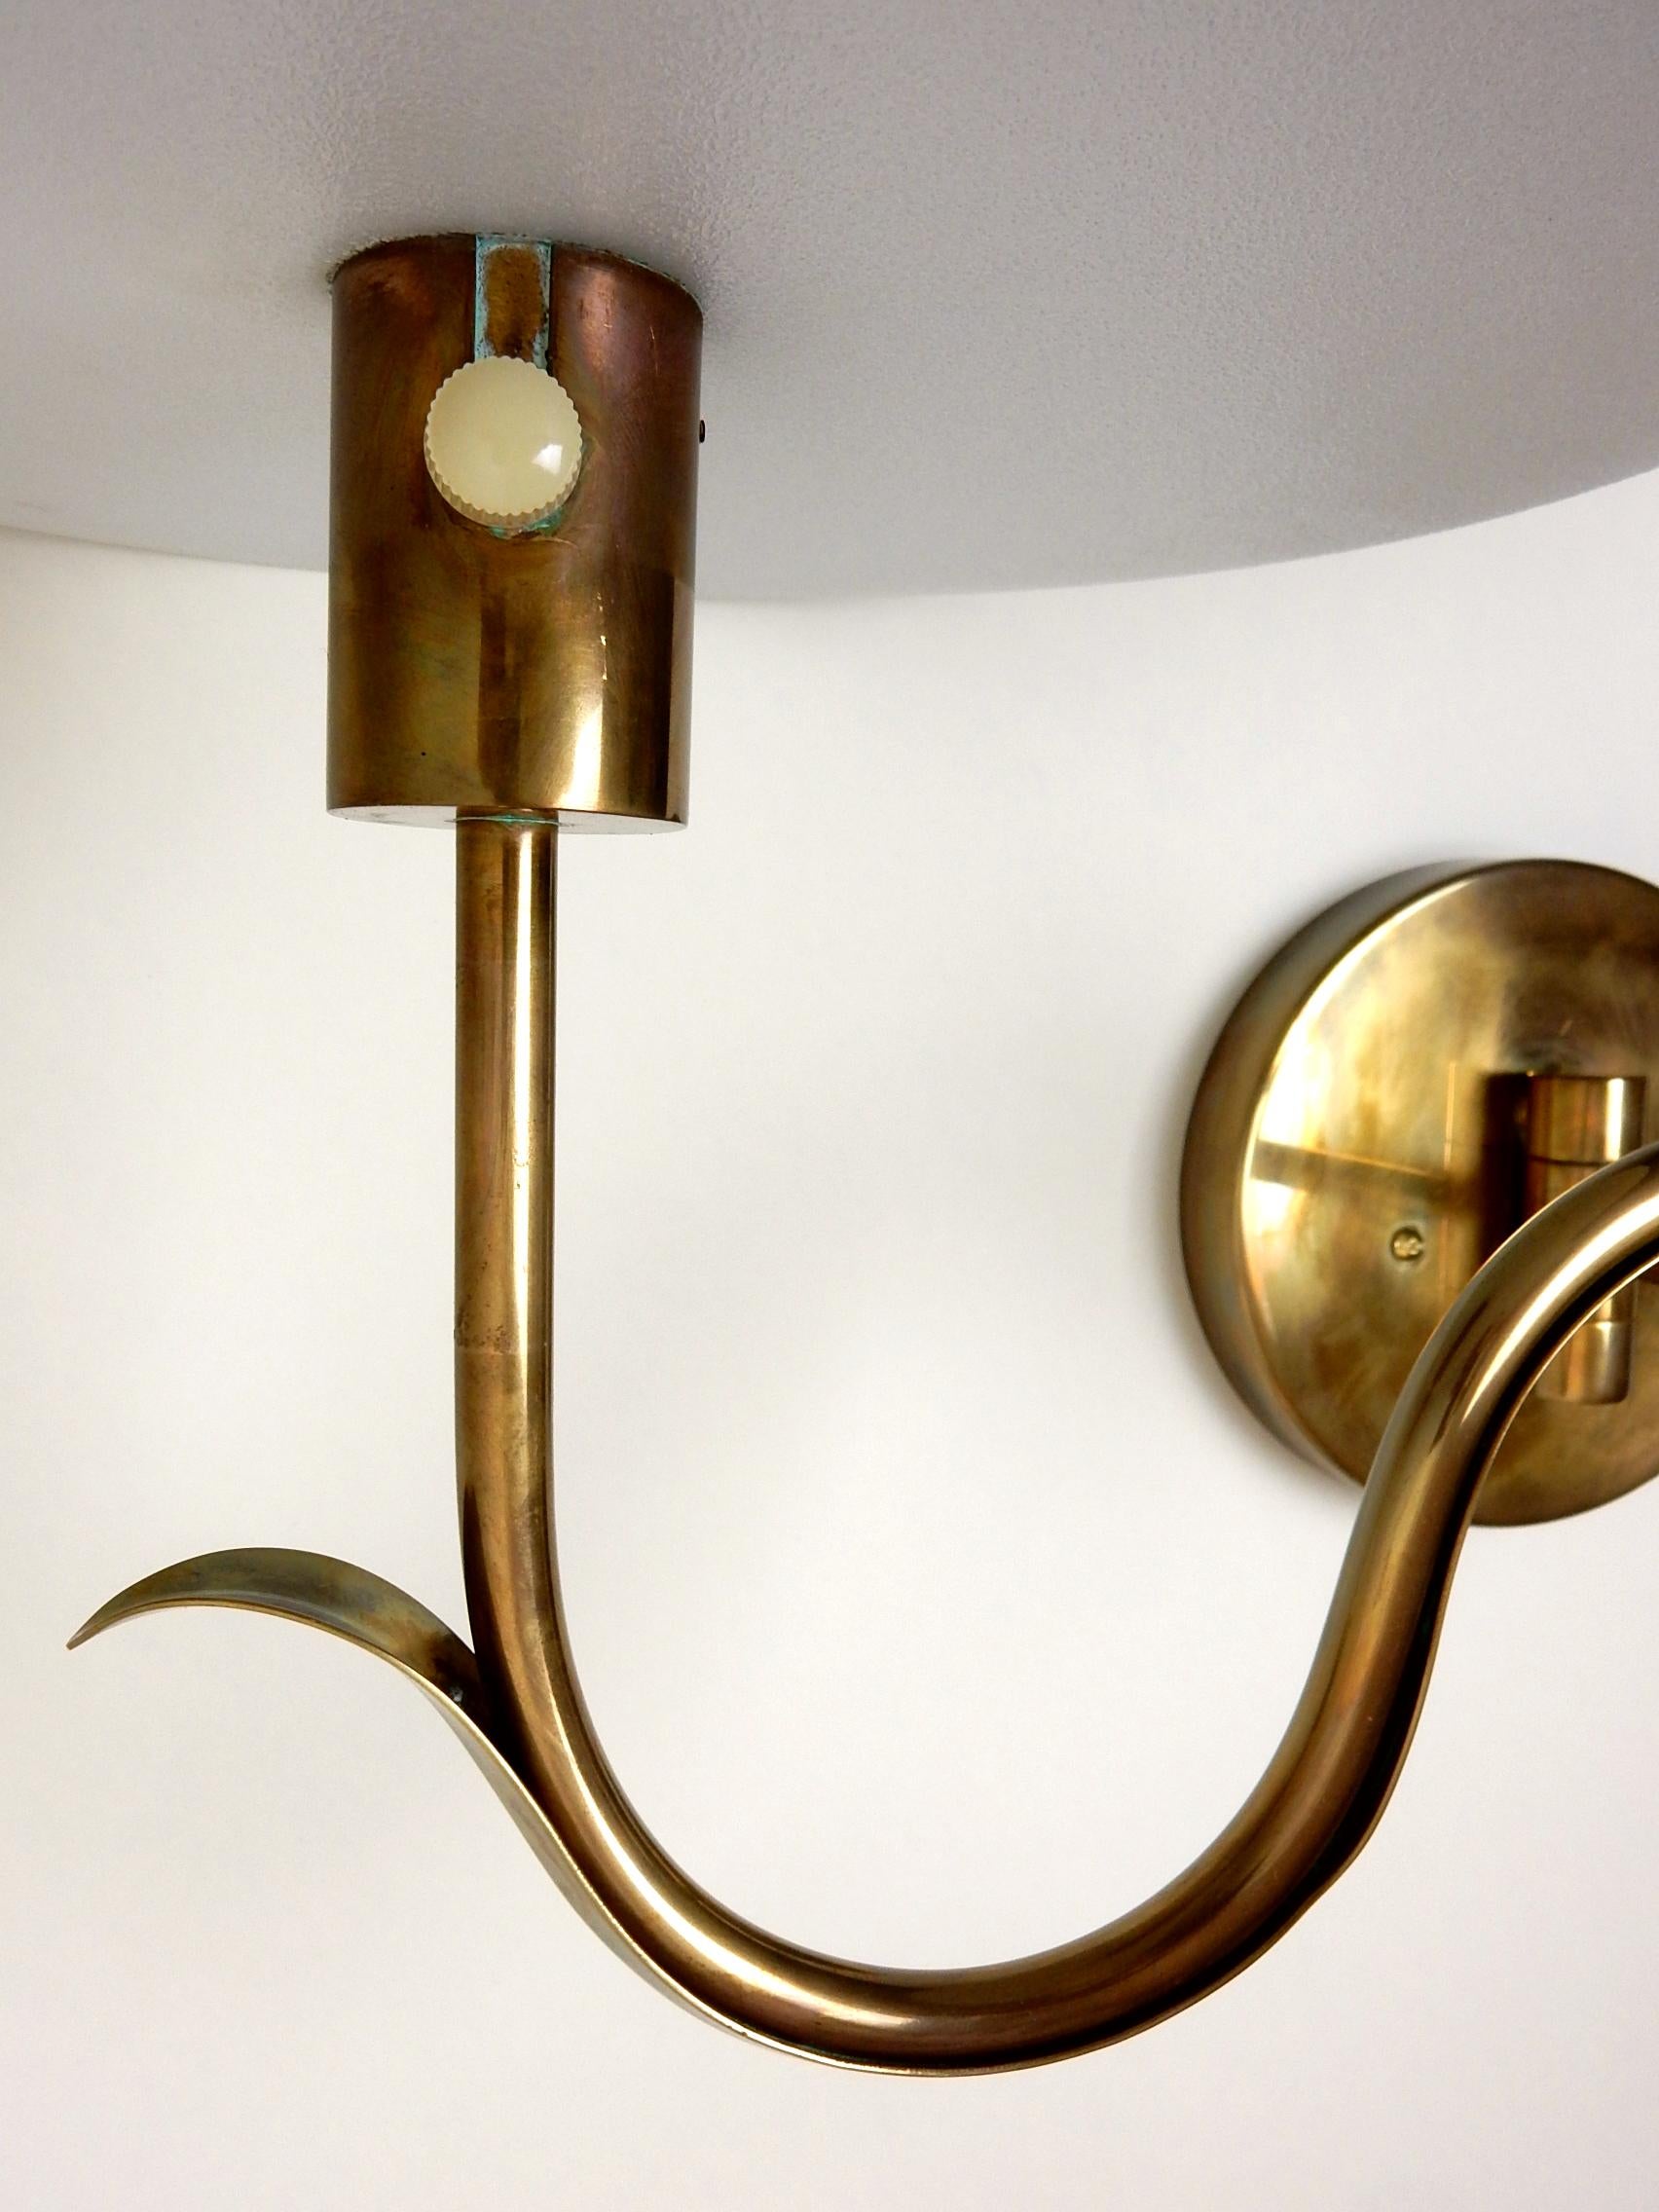 Lovely pair of Art Deco inspired swing arm sconces by Casella of San Francisco. 
13